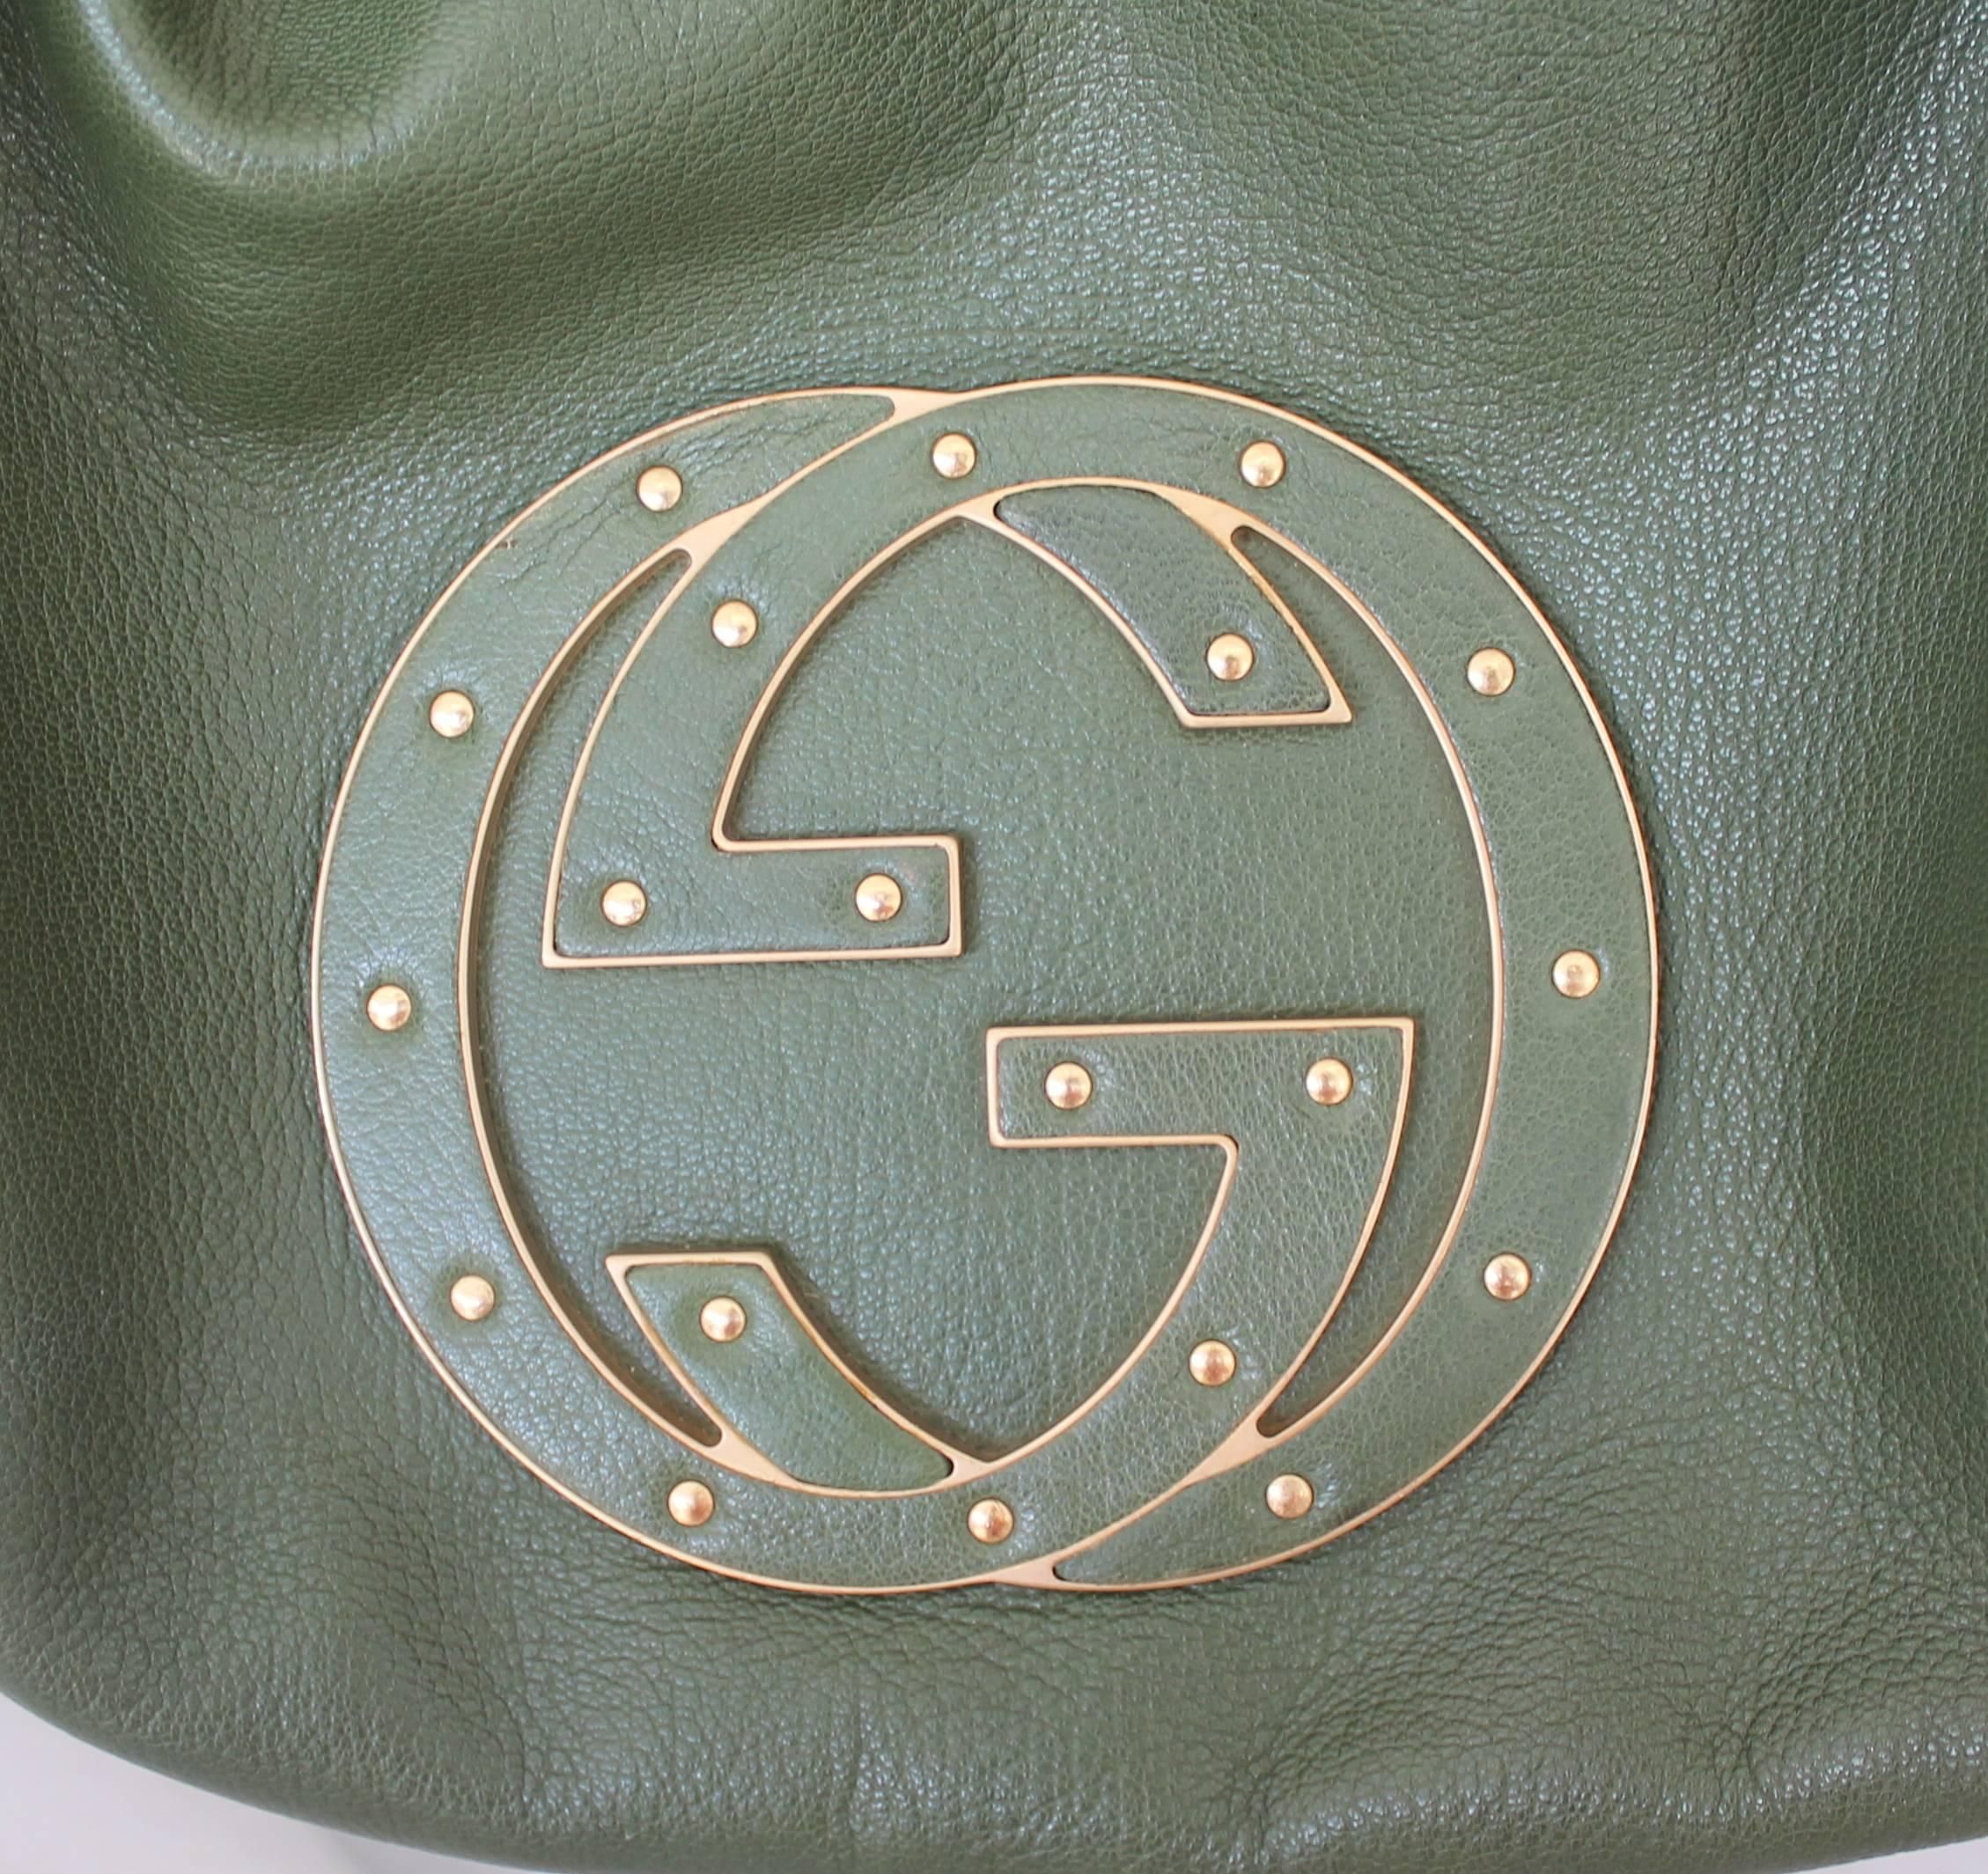 Tom Ford for Gucci Green Leather Hobo Shoulder Bag w/ Studs - GHW.  This vintage bag is in very good condition with only some wear consistent with its age.  It features a hobo style, large 